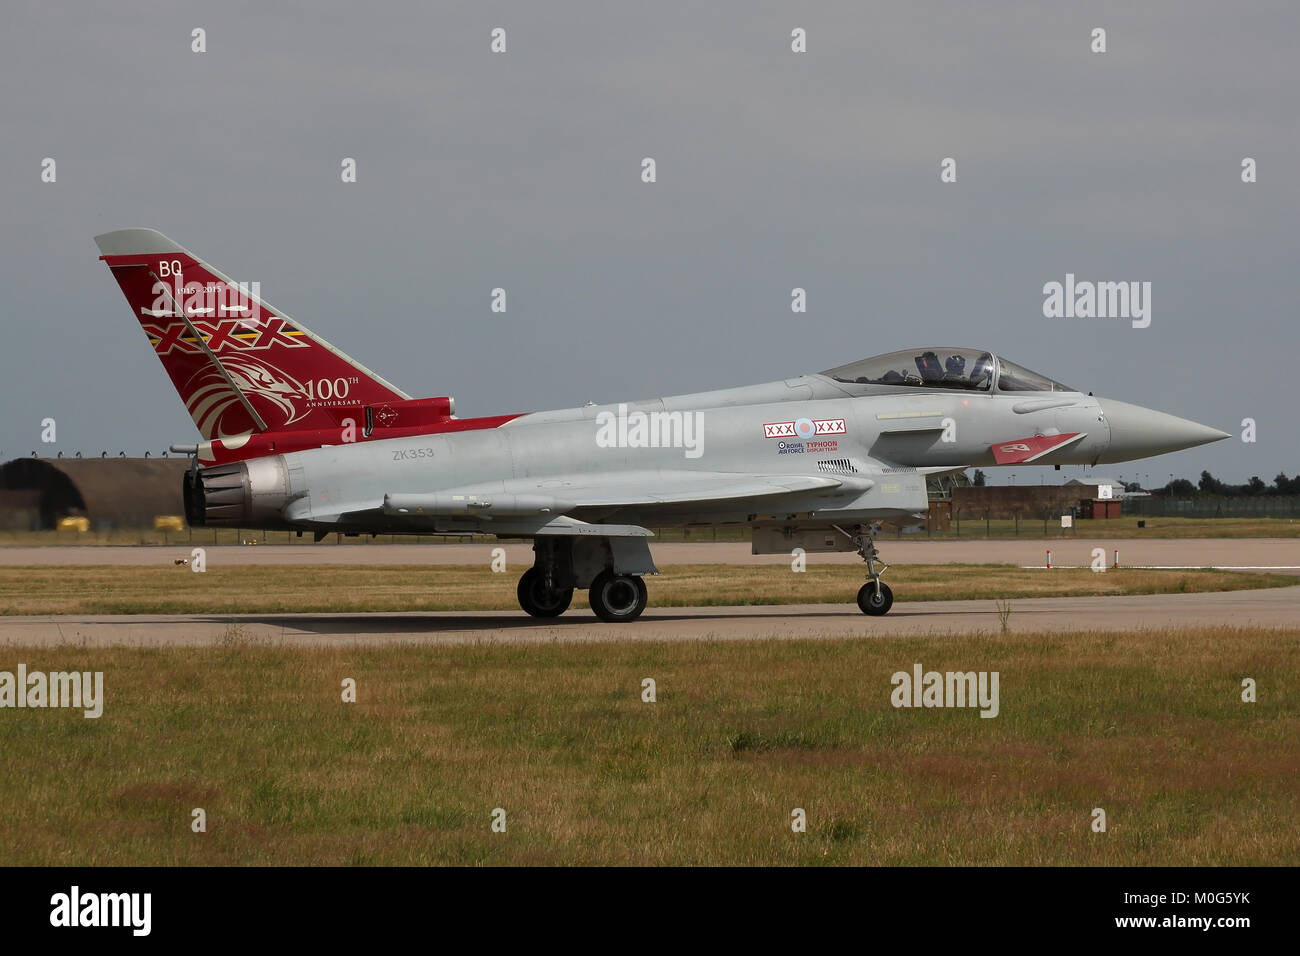 Showing the Squadron markings on a red tail, this Eurofighter Typhoon is  marked to commemorate the 100th anniversary of 29 Squadron, Royal Air Force  Stock Photo - Alamy